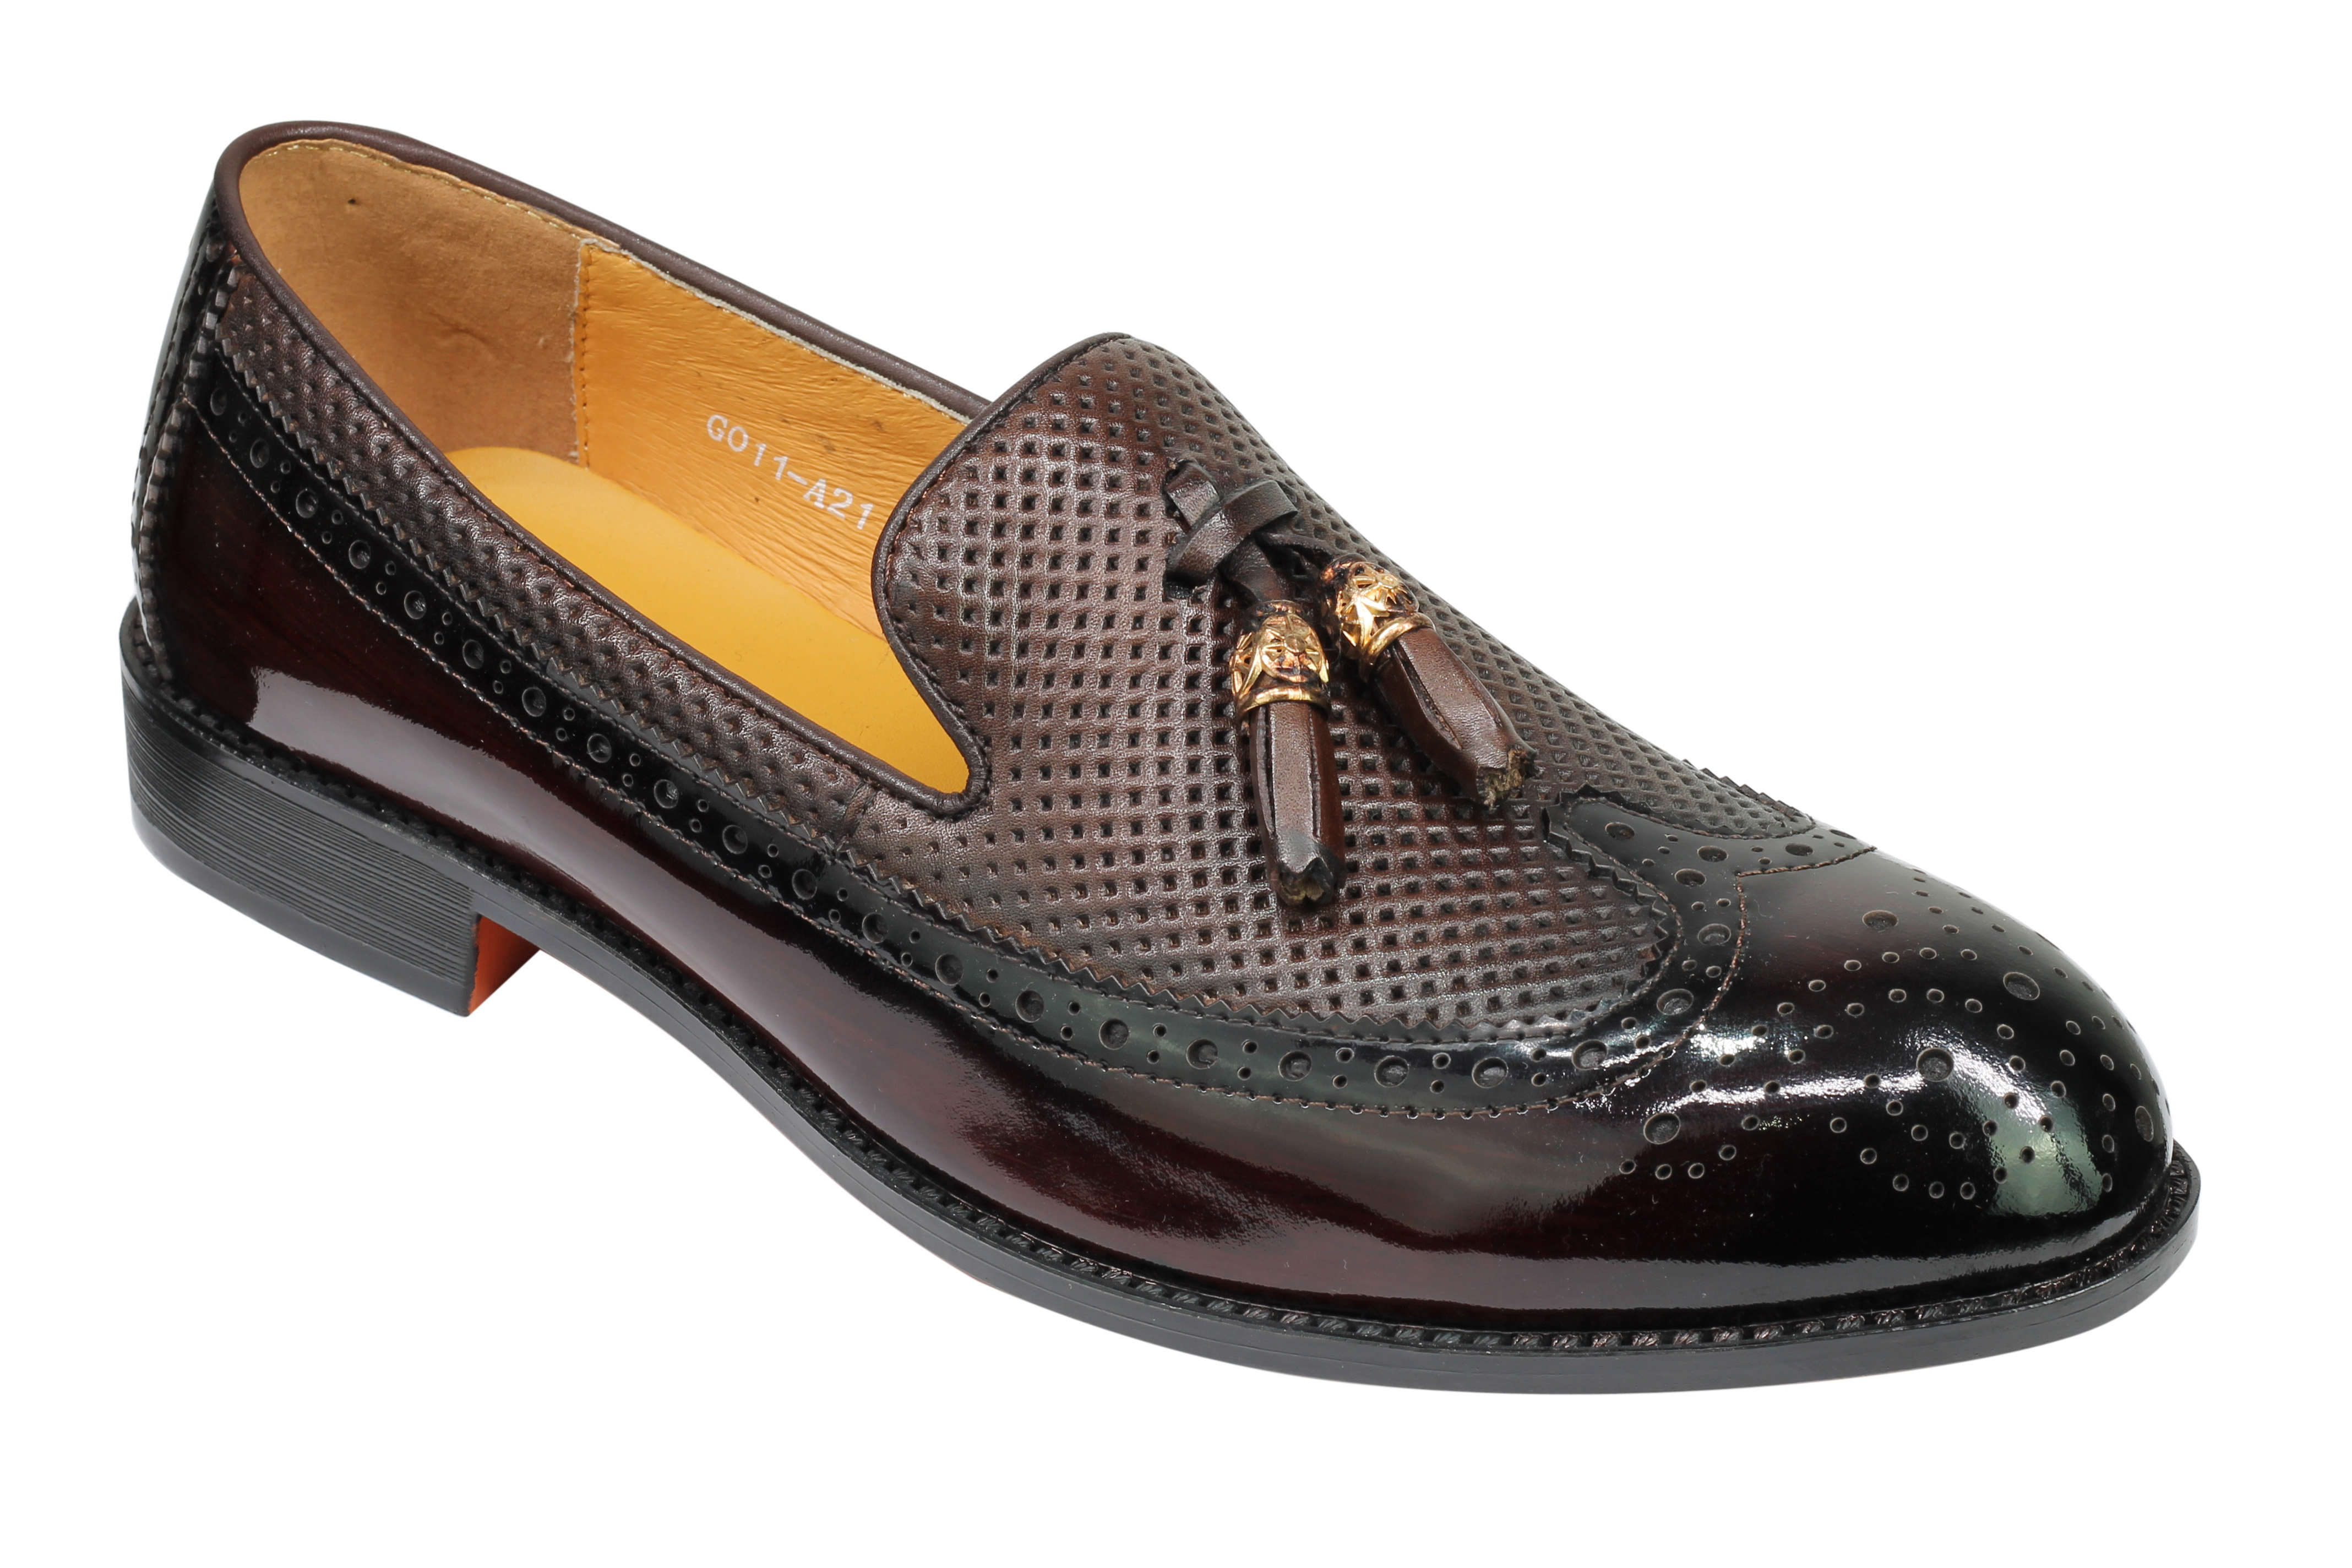 Real Leather Patent Tassel Slip Loafers